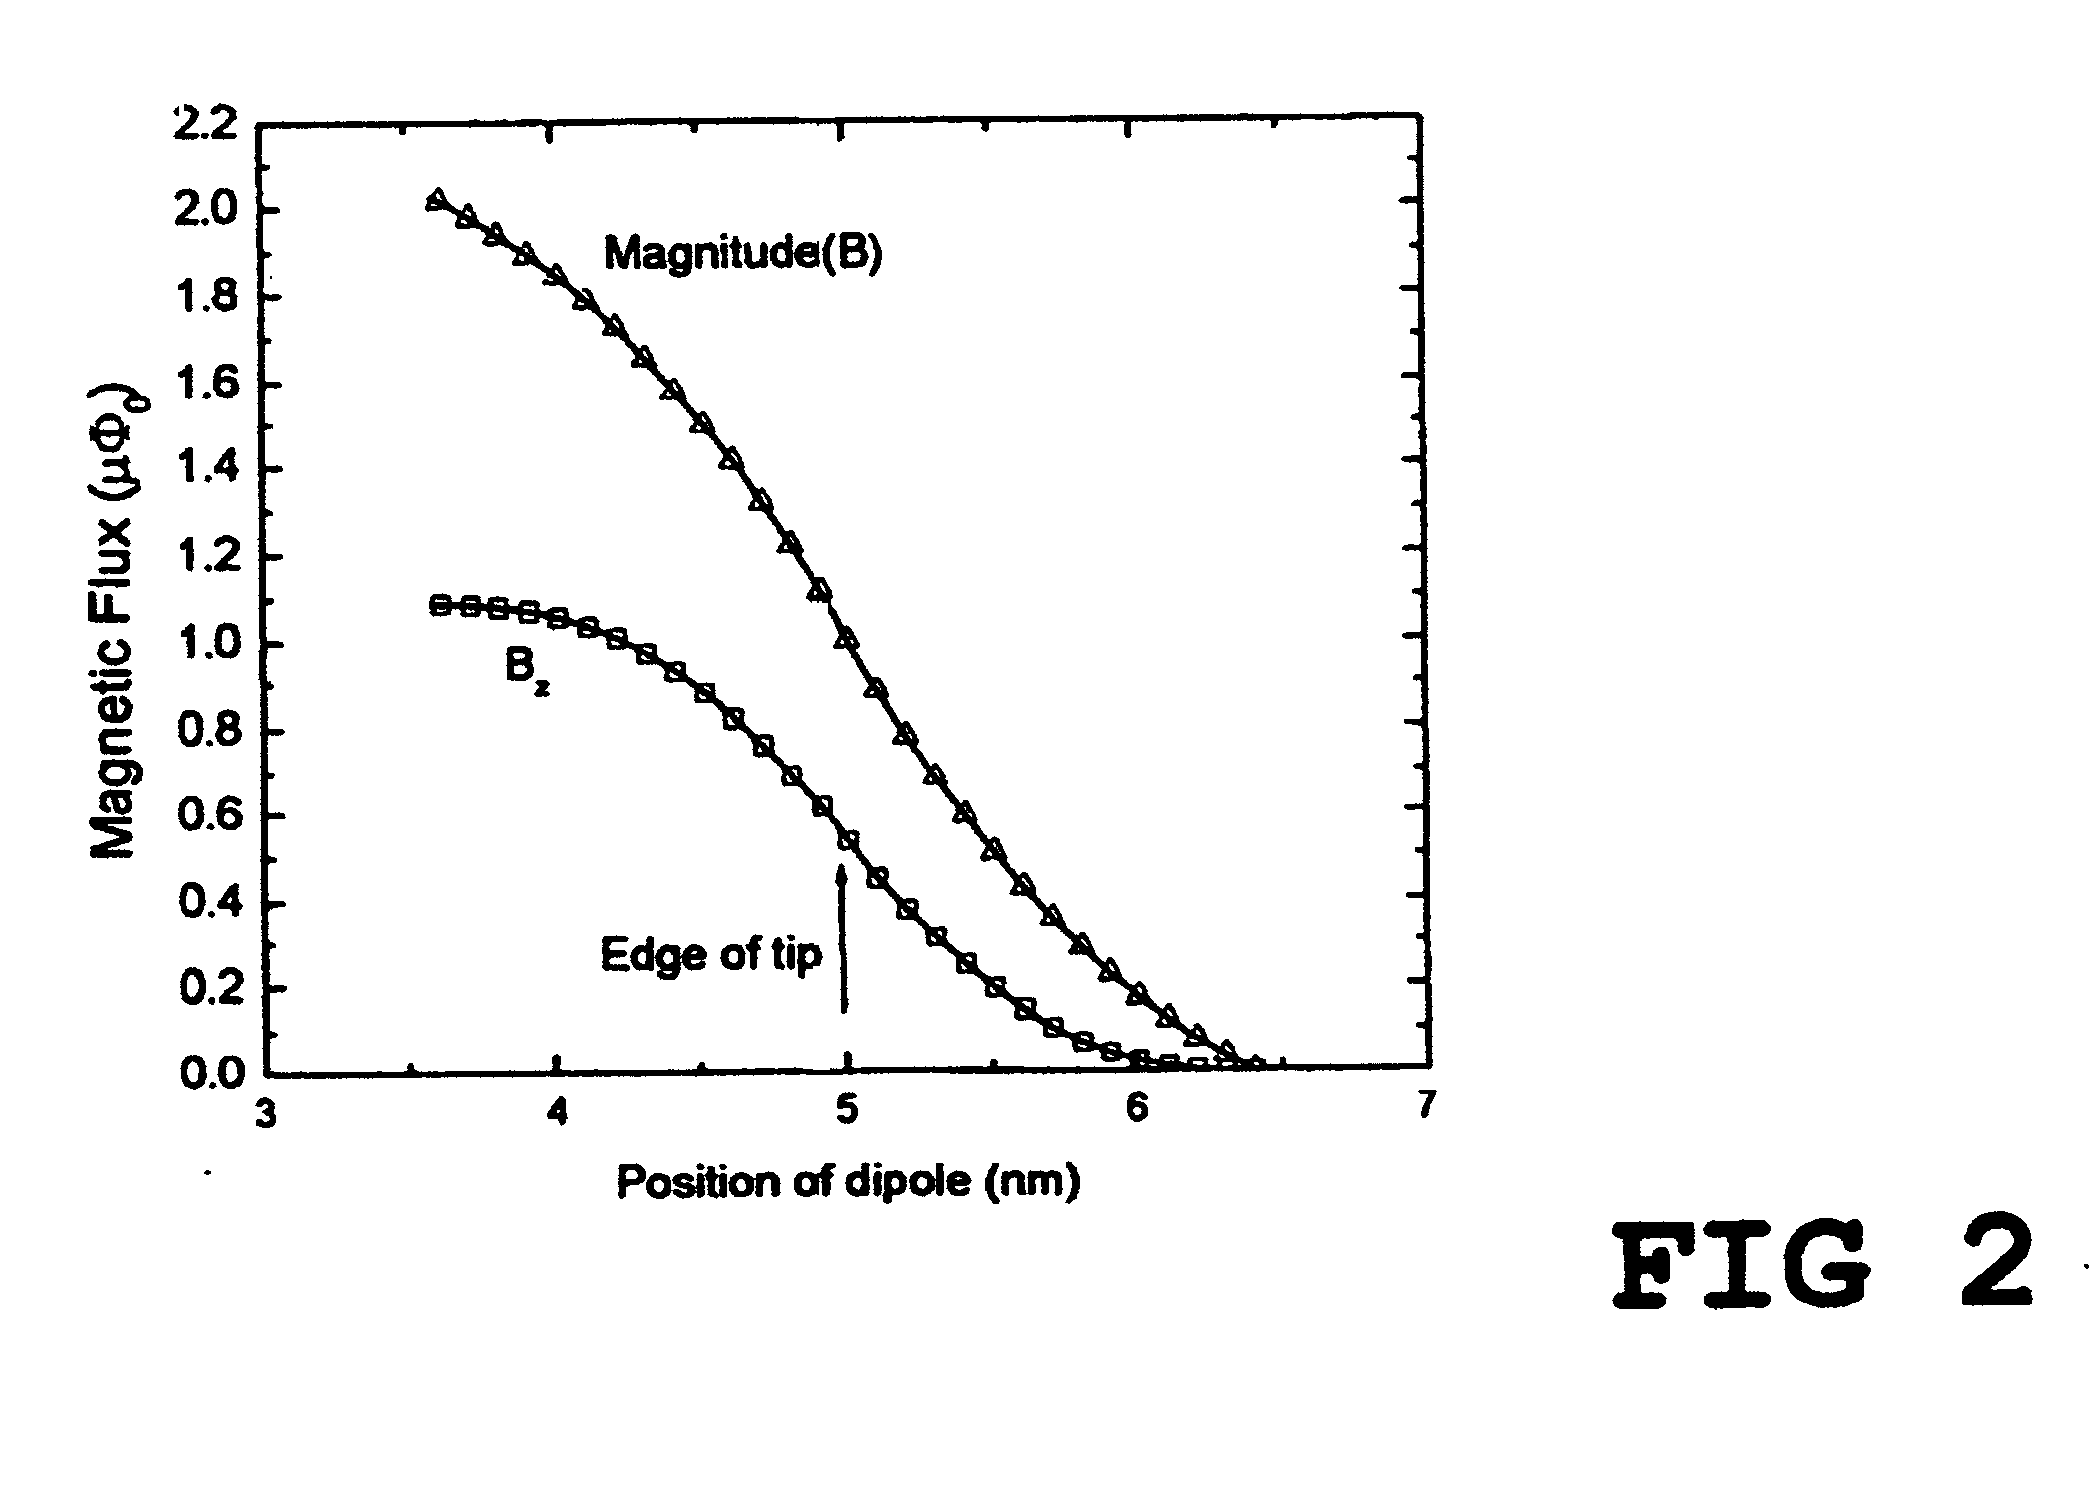 Apparatus for detecting magnetic signals and signals of electric tunneling